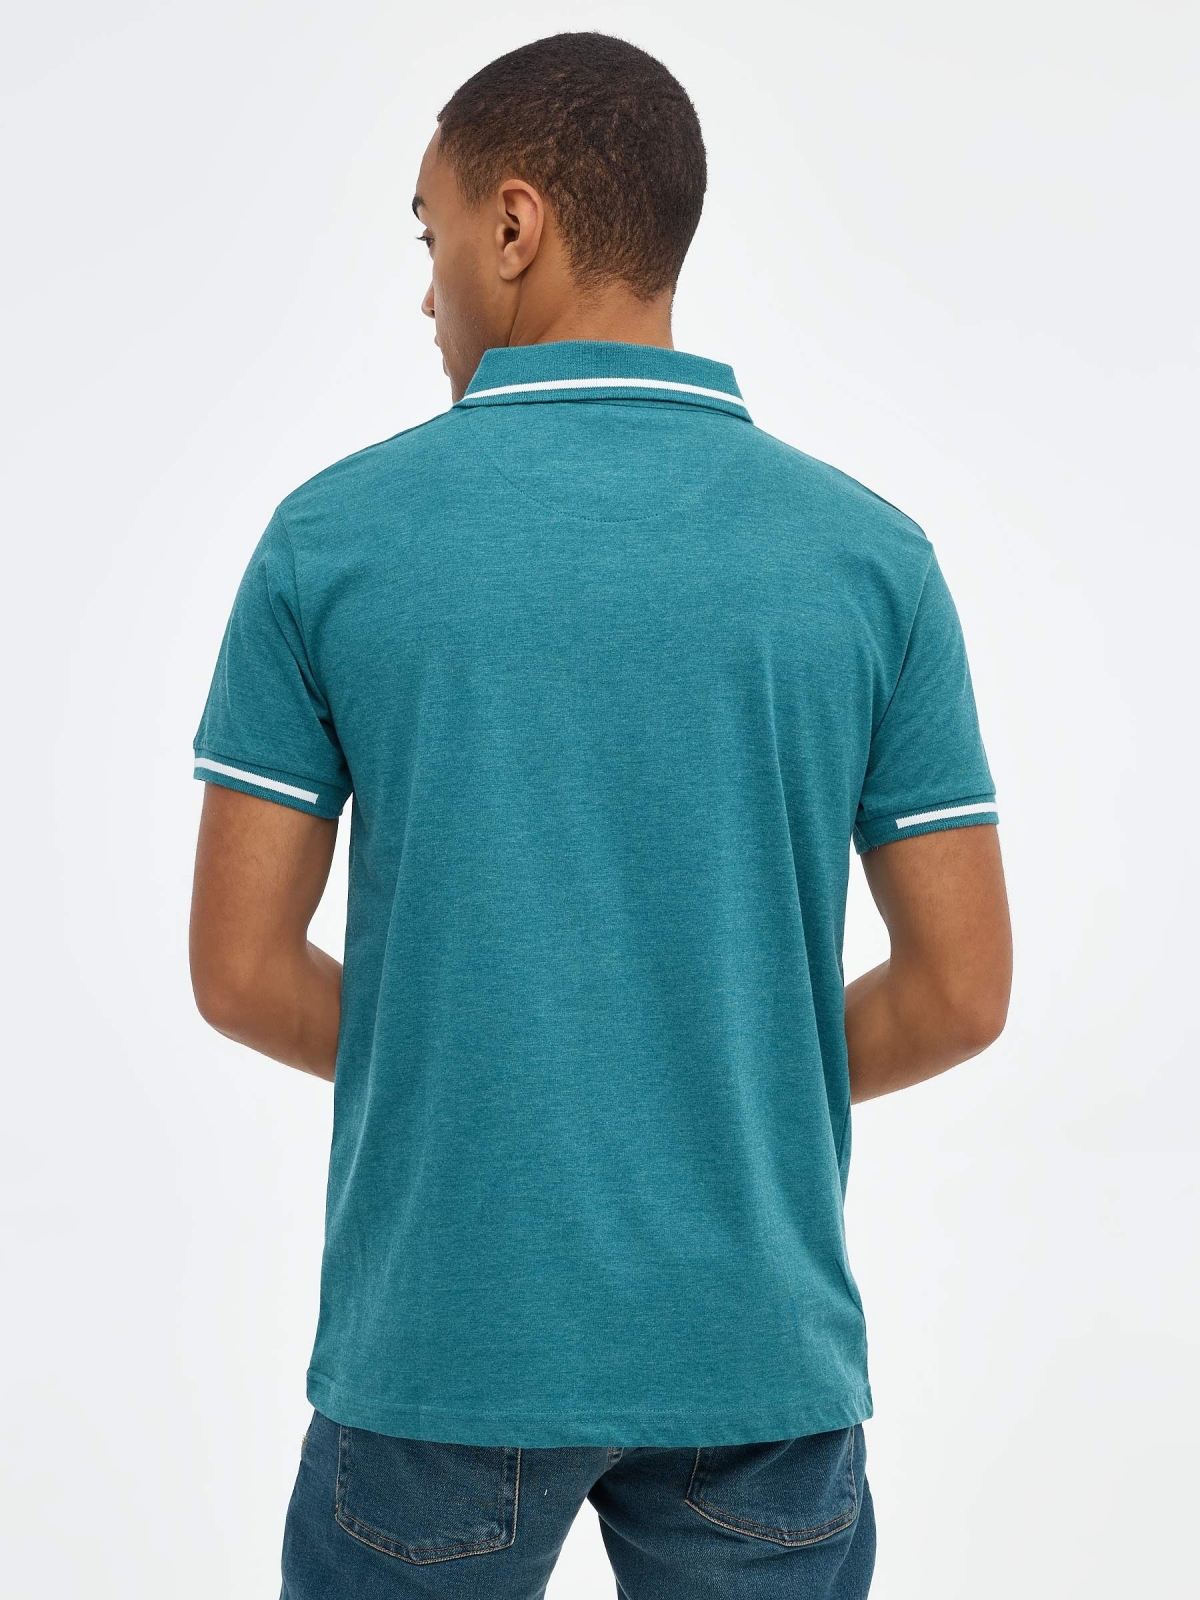 Dark gray casual polo shirt green middle back view